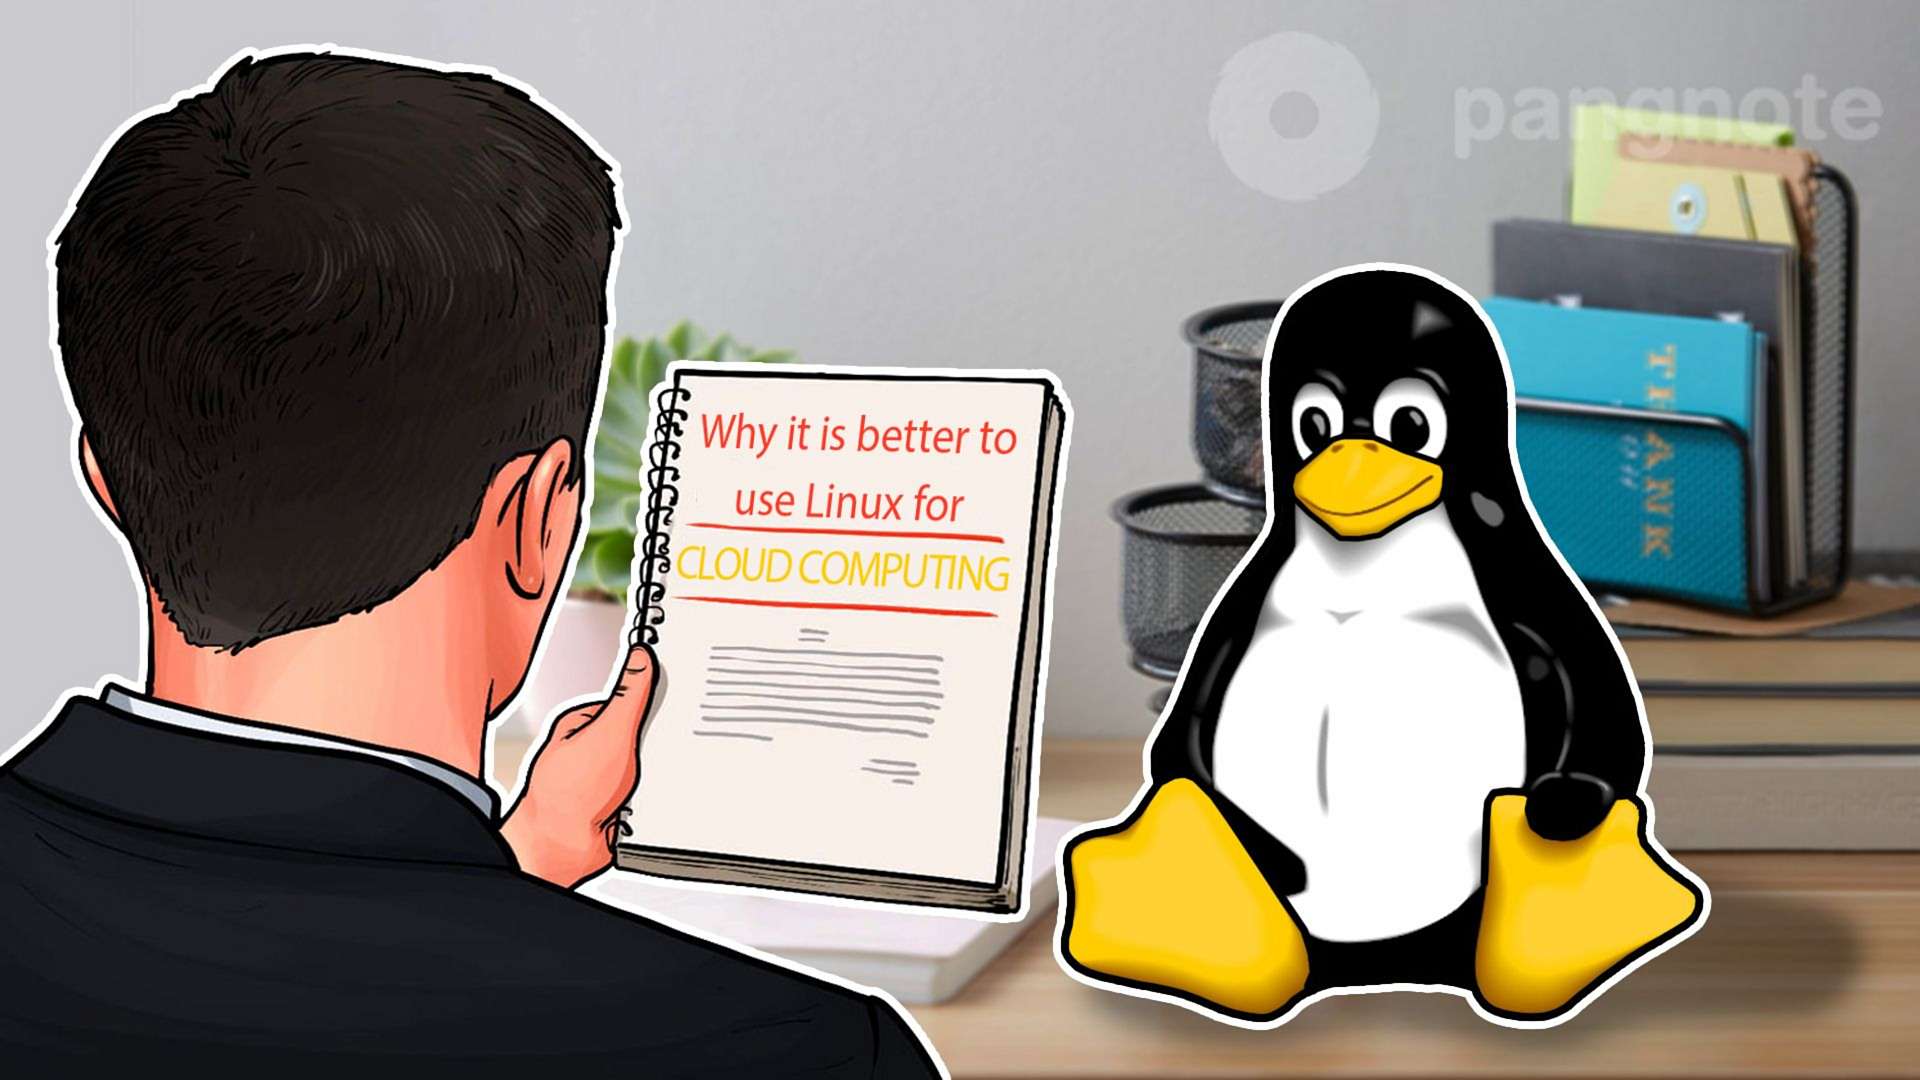 Why it is better to use Linux for cloud computing